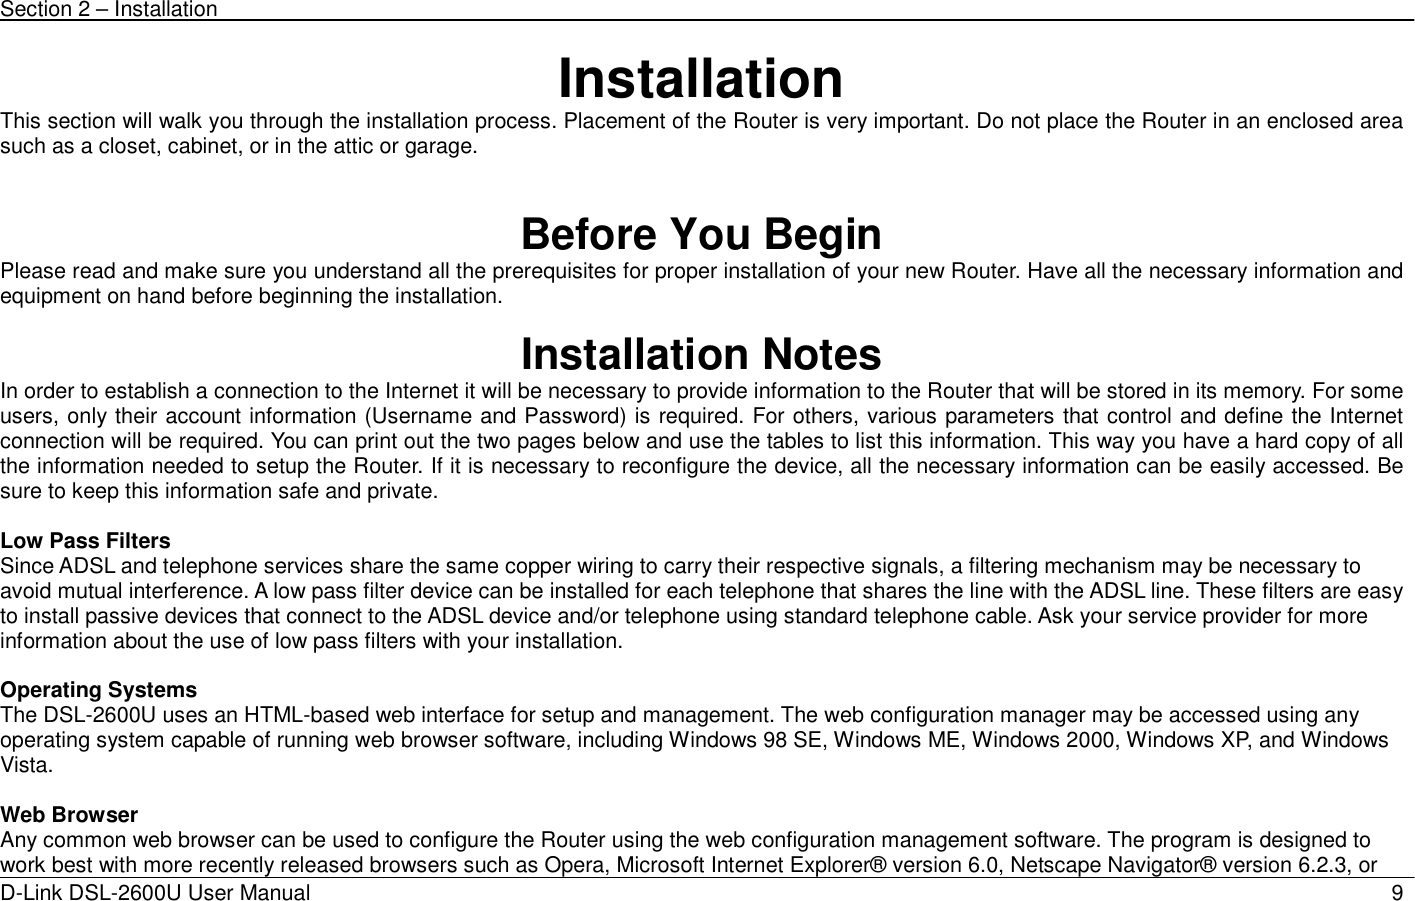 Section 2 – Installation   D-Link DSL-2600U User Manual                            9Installation This section will walk you through the installation process. Placement of the Router is very important. Do not place the Router in an enclosed area such as a closet, cabinet, or in the attic or garage.   Before You Begin Please read and make sure you understand all the prerequisites for proper installation of your new Router. Have all the necessary information and equipment on hand before beginning the installation.  Installation Notes In order to establish a connection to the Internet it will be necessary to provide information to the Router that will be stored in its memory. For some users, only their account information (Username and Password) is required. For others, various parameters that control and define the Internet connection will be required. You can print out the two pages below and use the tables to list this information. This way you have a hard copy of all the information needed to setup the Router. If it is necessary to reconfigure the device, all the necessary information can be easily accessed. Be sure to keep this information safe and private.  Low Pass Filters Since ADSL and telephone services share the same copper wiring to carry their respective signals, a filtering mechanism may be necessary to avoid mutual interference. A low pass filter device can be installed for each telephone that shares the line with the ADSL line. These filters are easy to install passive devices that connect to the ADSL device and/or telephone using standard telephone cable. Ask your service provider for more information about the use of low pass filters with your installation.    Operating Systems The DSL-2600U uses an HTML-based web interface for setup and management. The web configuration manager may be accessed using any operating system capable of running web browser software, including Windows 98 SE, Windows ME, Windows 2000, Windows XP, and Windows Vista.   Web Browser Any common web browser can be used to configure the Router using the web configuration management software. The program is designed to work best with more recently released browsers such as Opera, Microsoft Internet Explorer® version 6.0, Netscape Navigator® version 6.2.3, or 